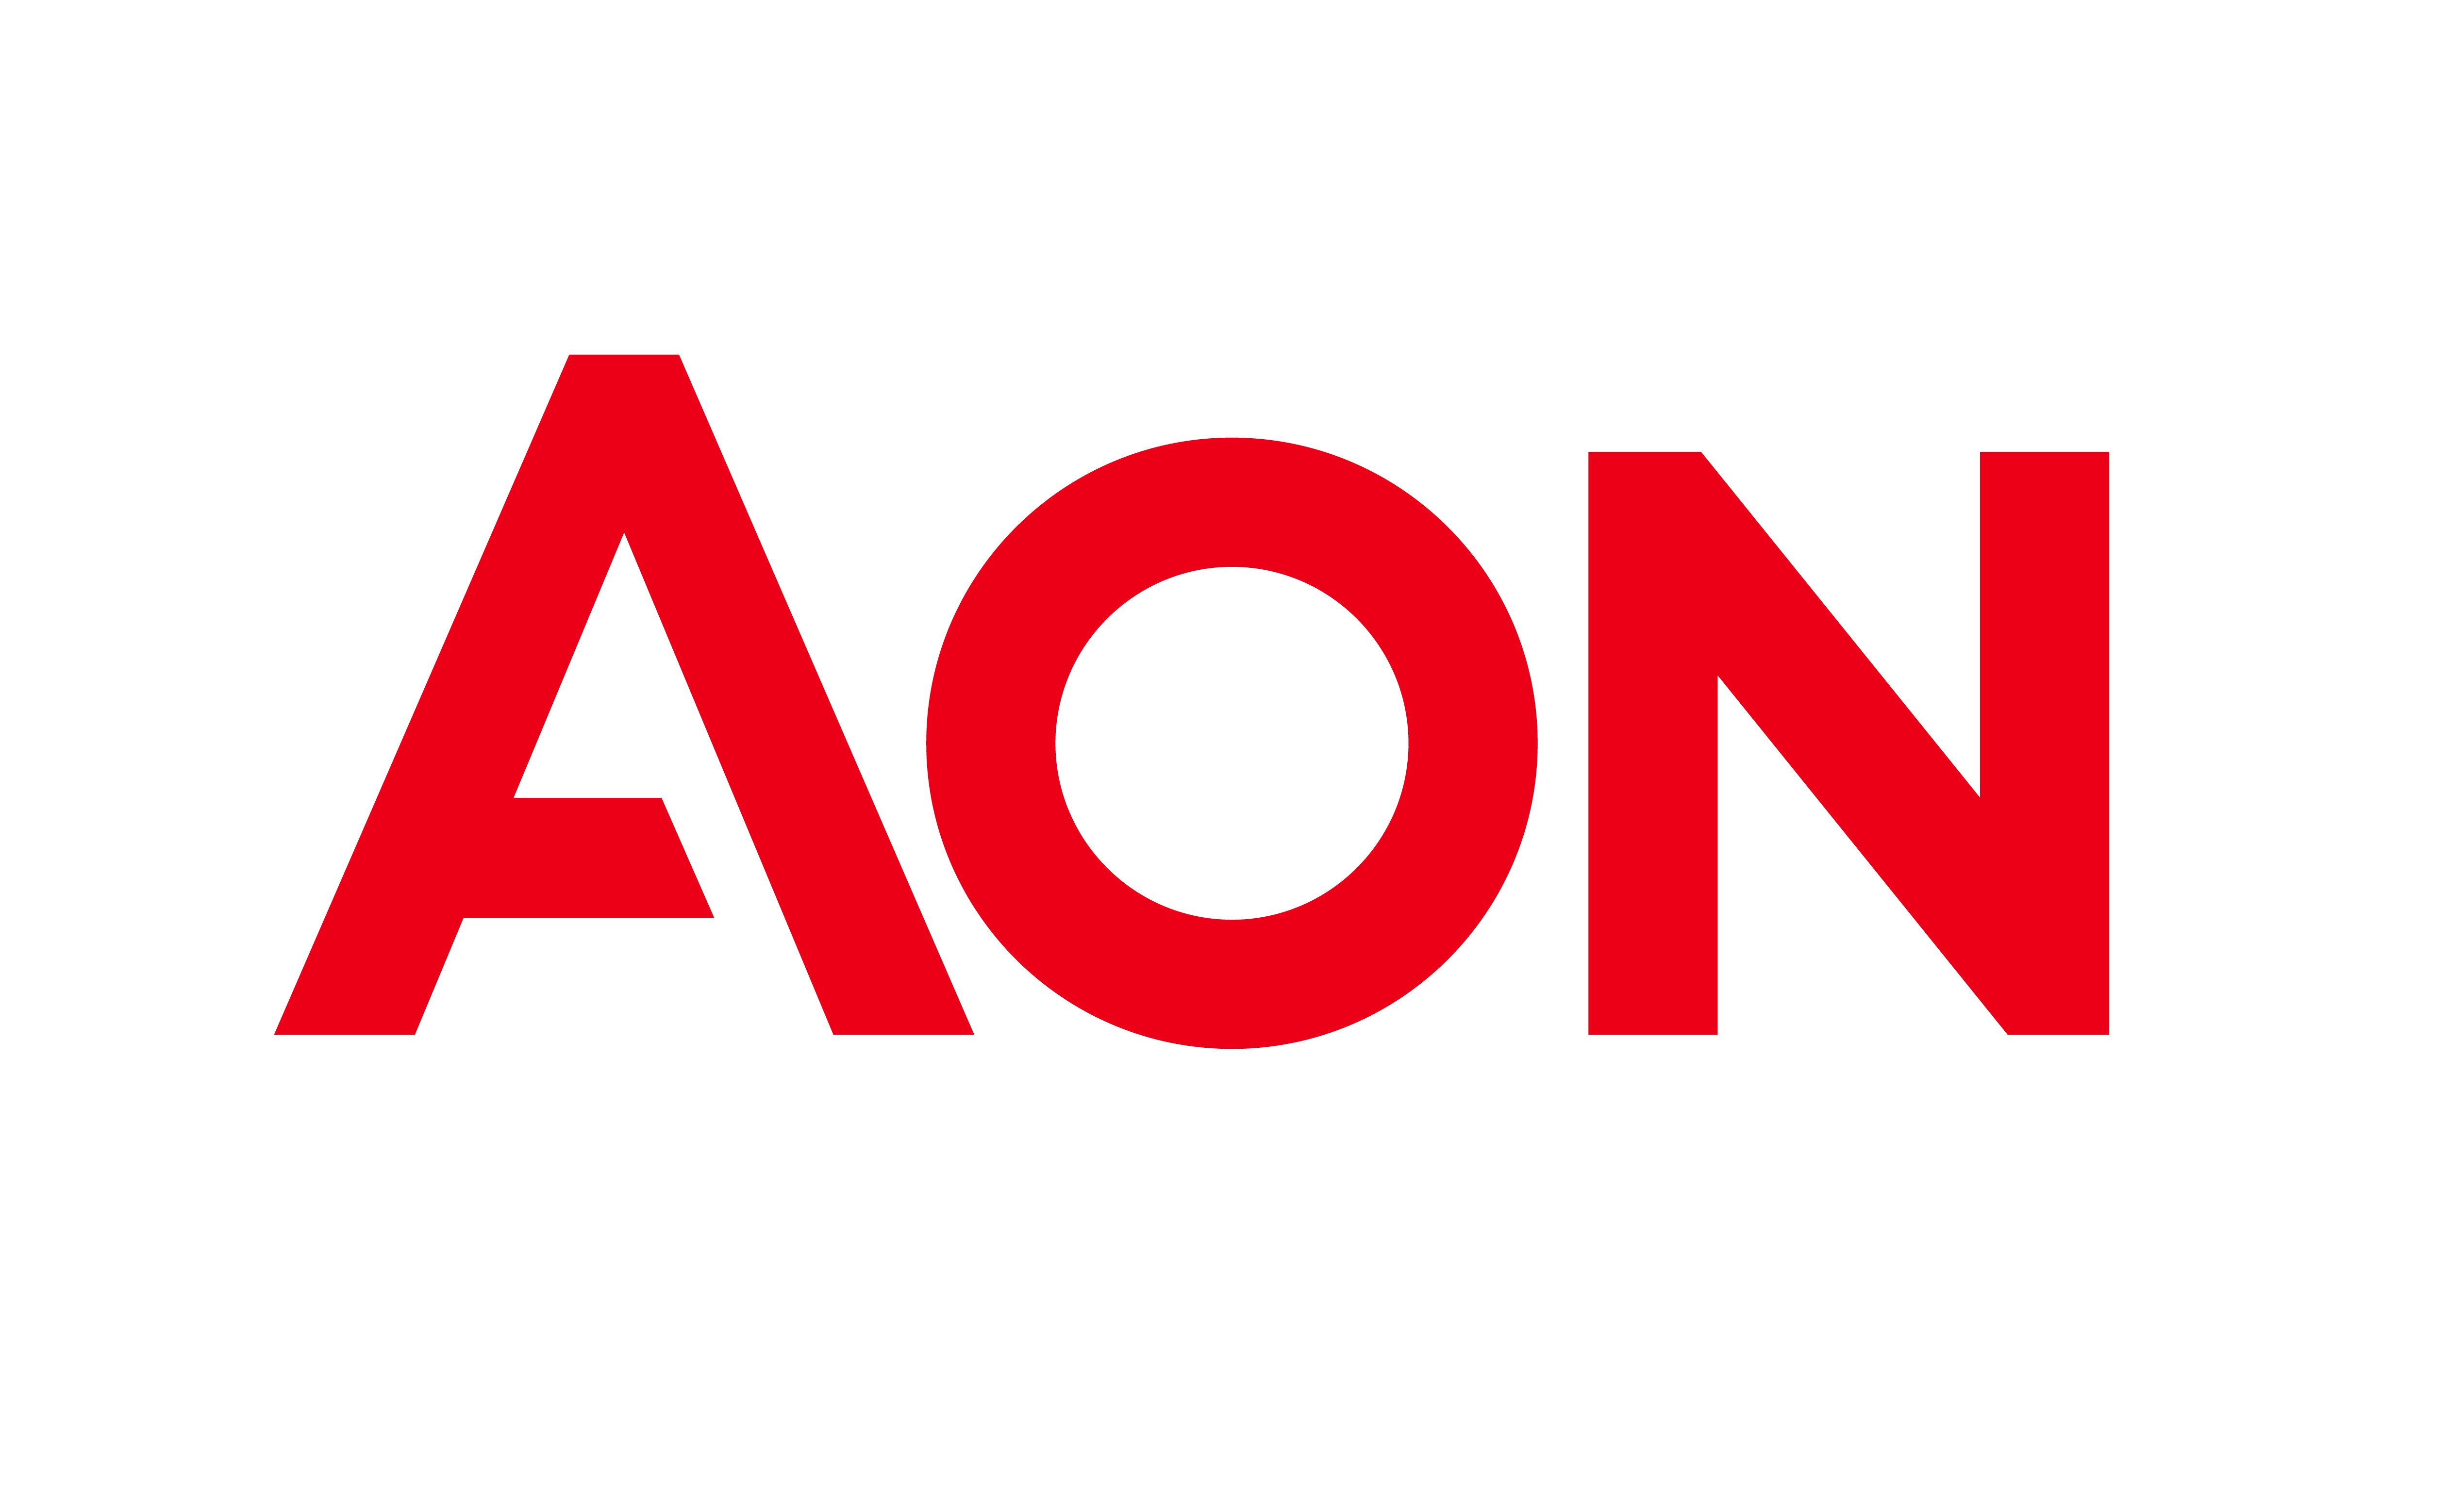 AON for insurance